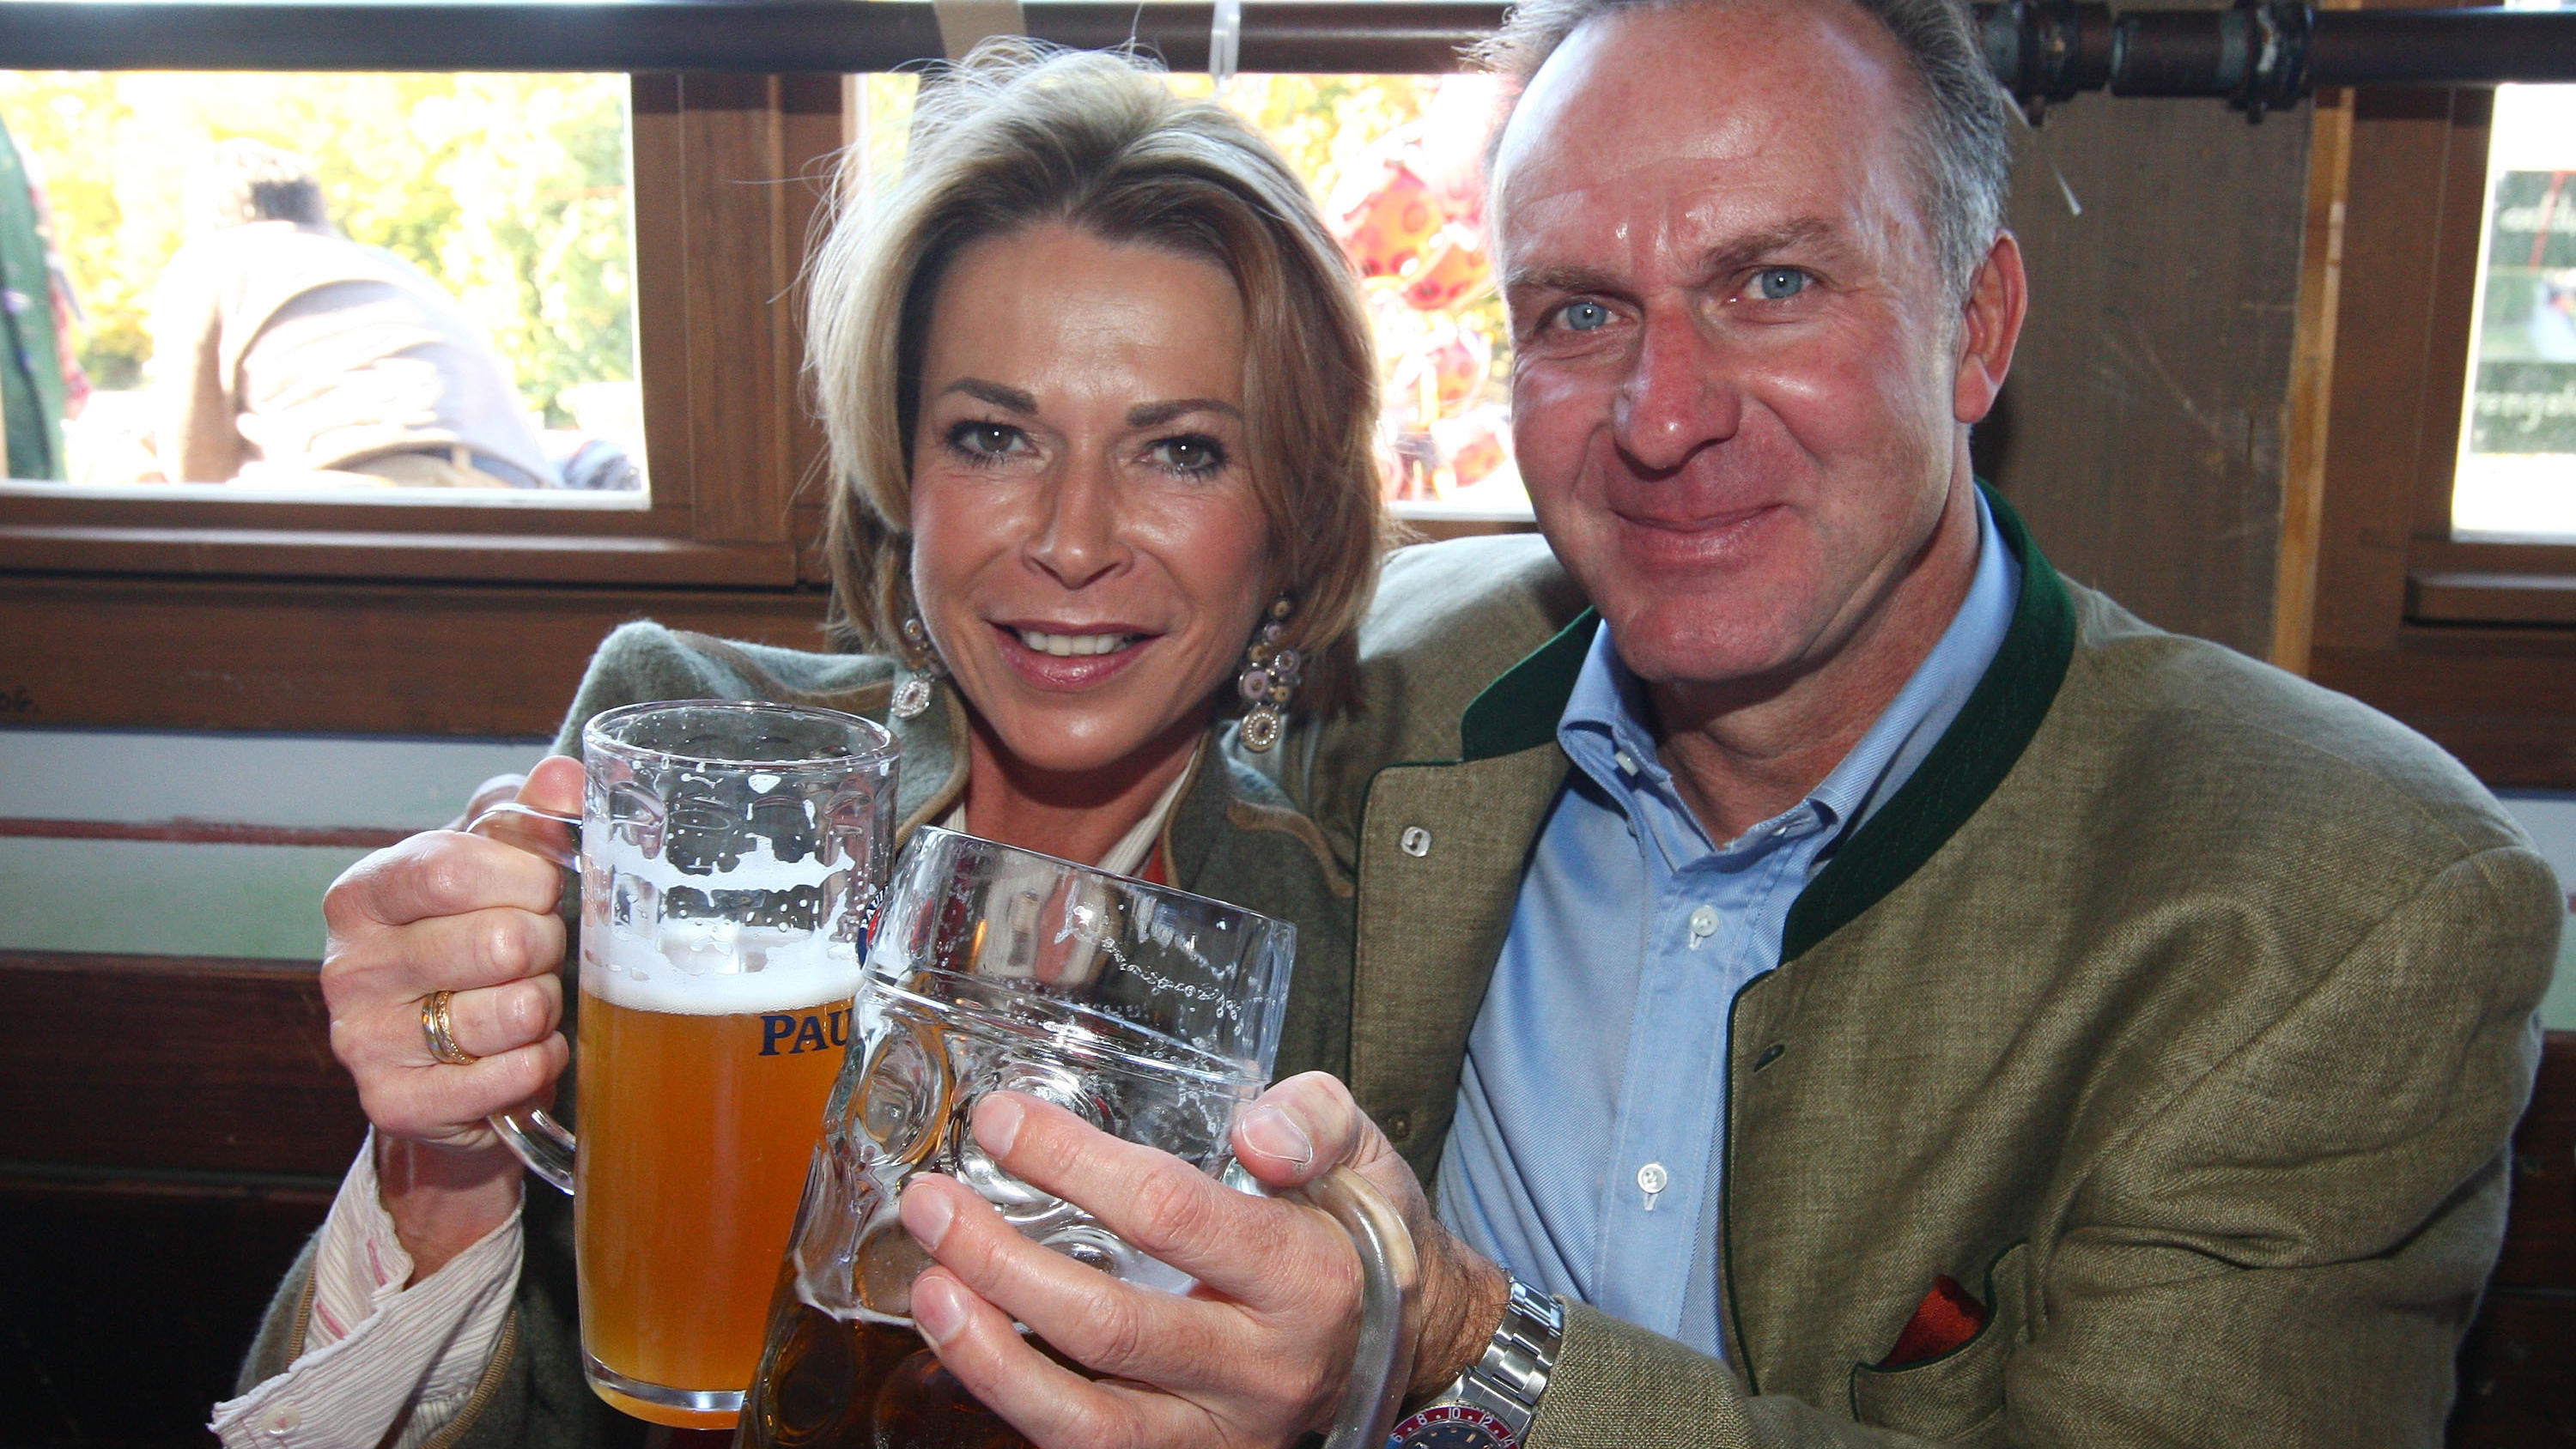 MUNICH, GERMANY - OCTOBER 05:  Karl Heinz Rummenigge (R) of Bayern Muenchen and wife Martina attend the Kaefer beer tent at the Oktoberfest beer festival on October 5, 2008 in Munich, Germany.  (Photo by Johannes Simon/Bongarts/Getty Images)